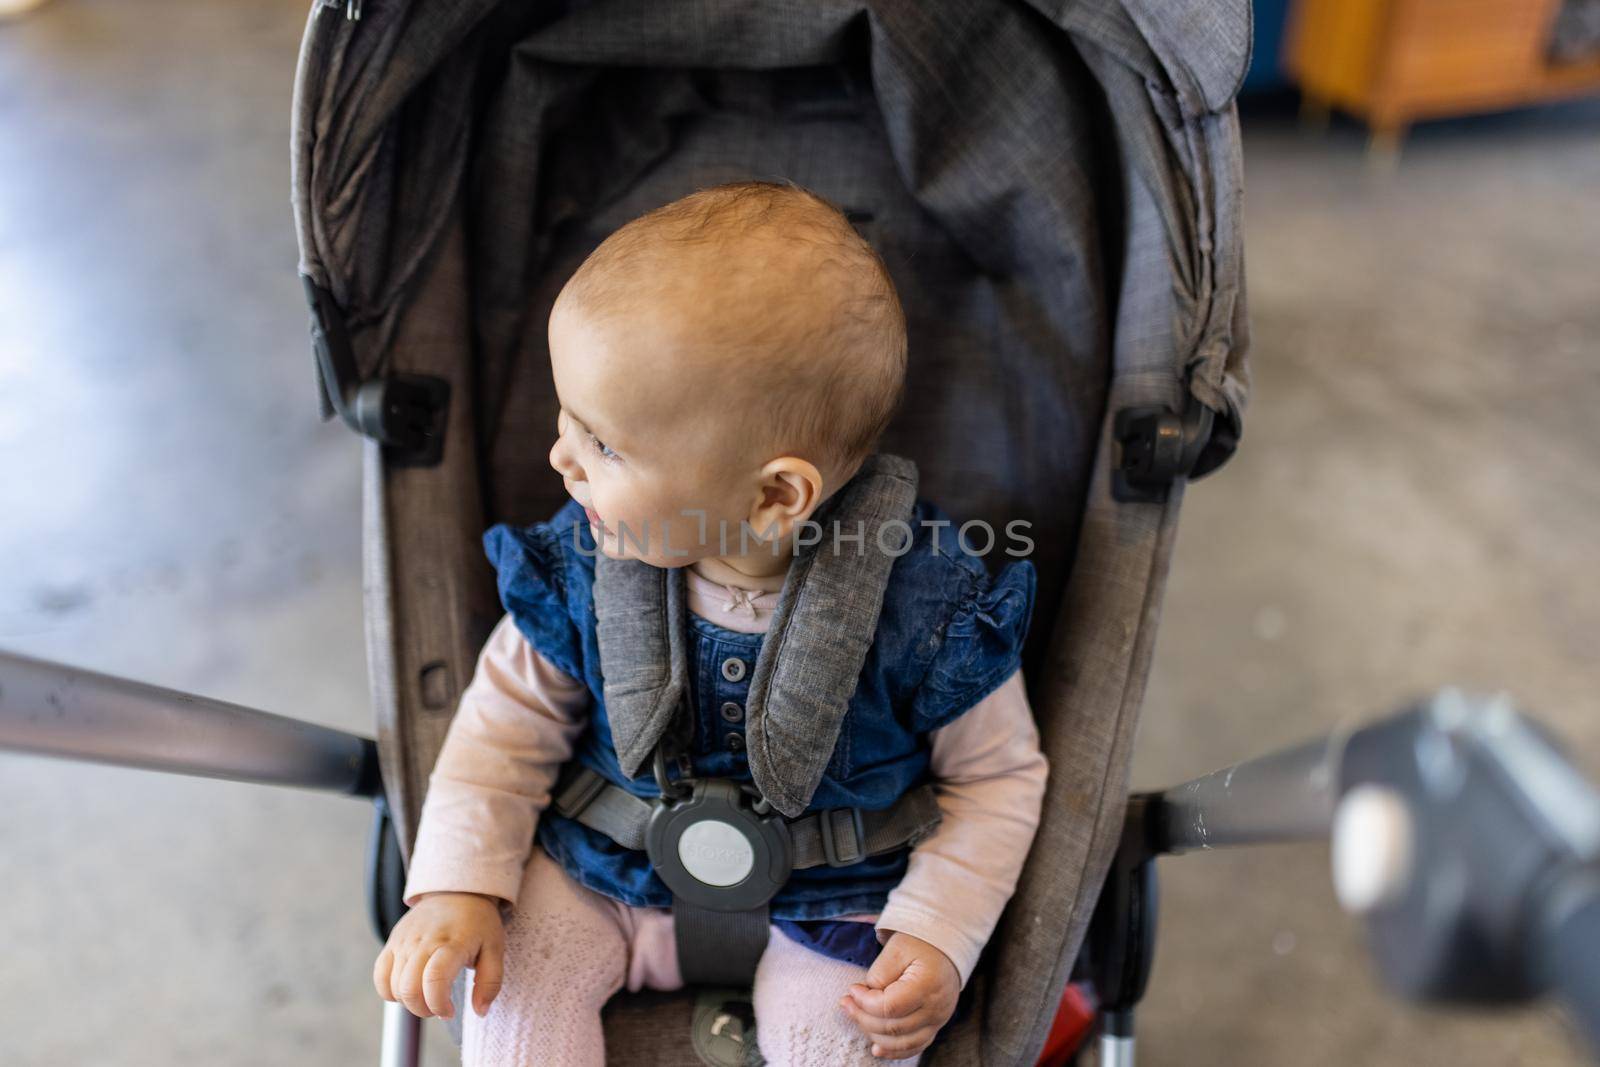 Adorable view of happy baby looking away in gray stroller with blurry background. Portrait of cute infant in blue dress resting in stroller inside a restaurant. Peaceful toddlers indoors